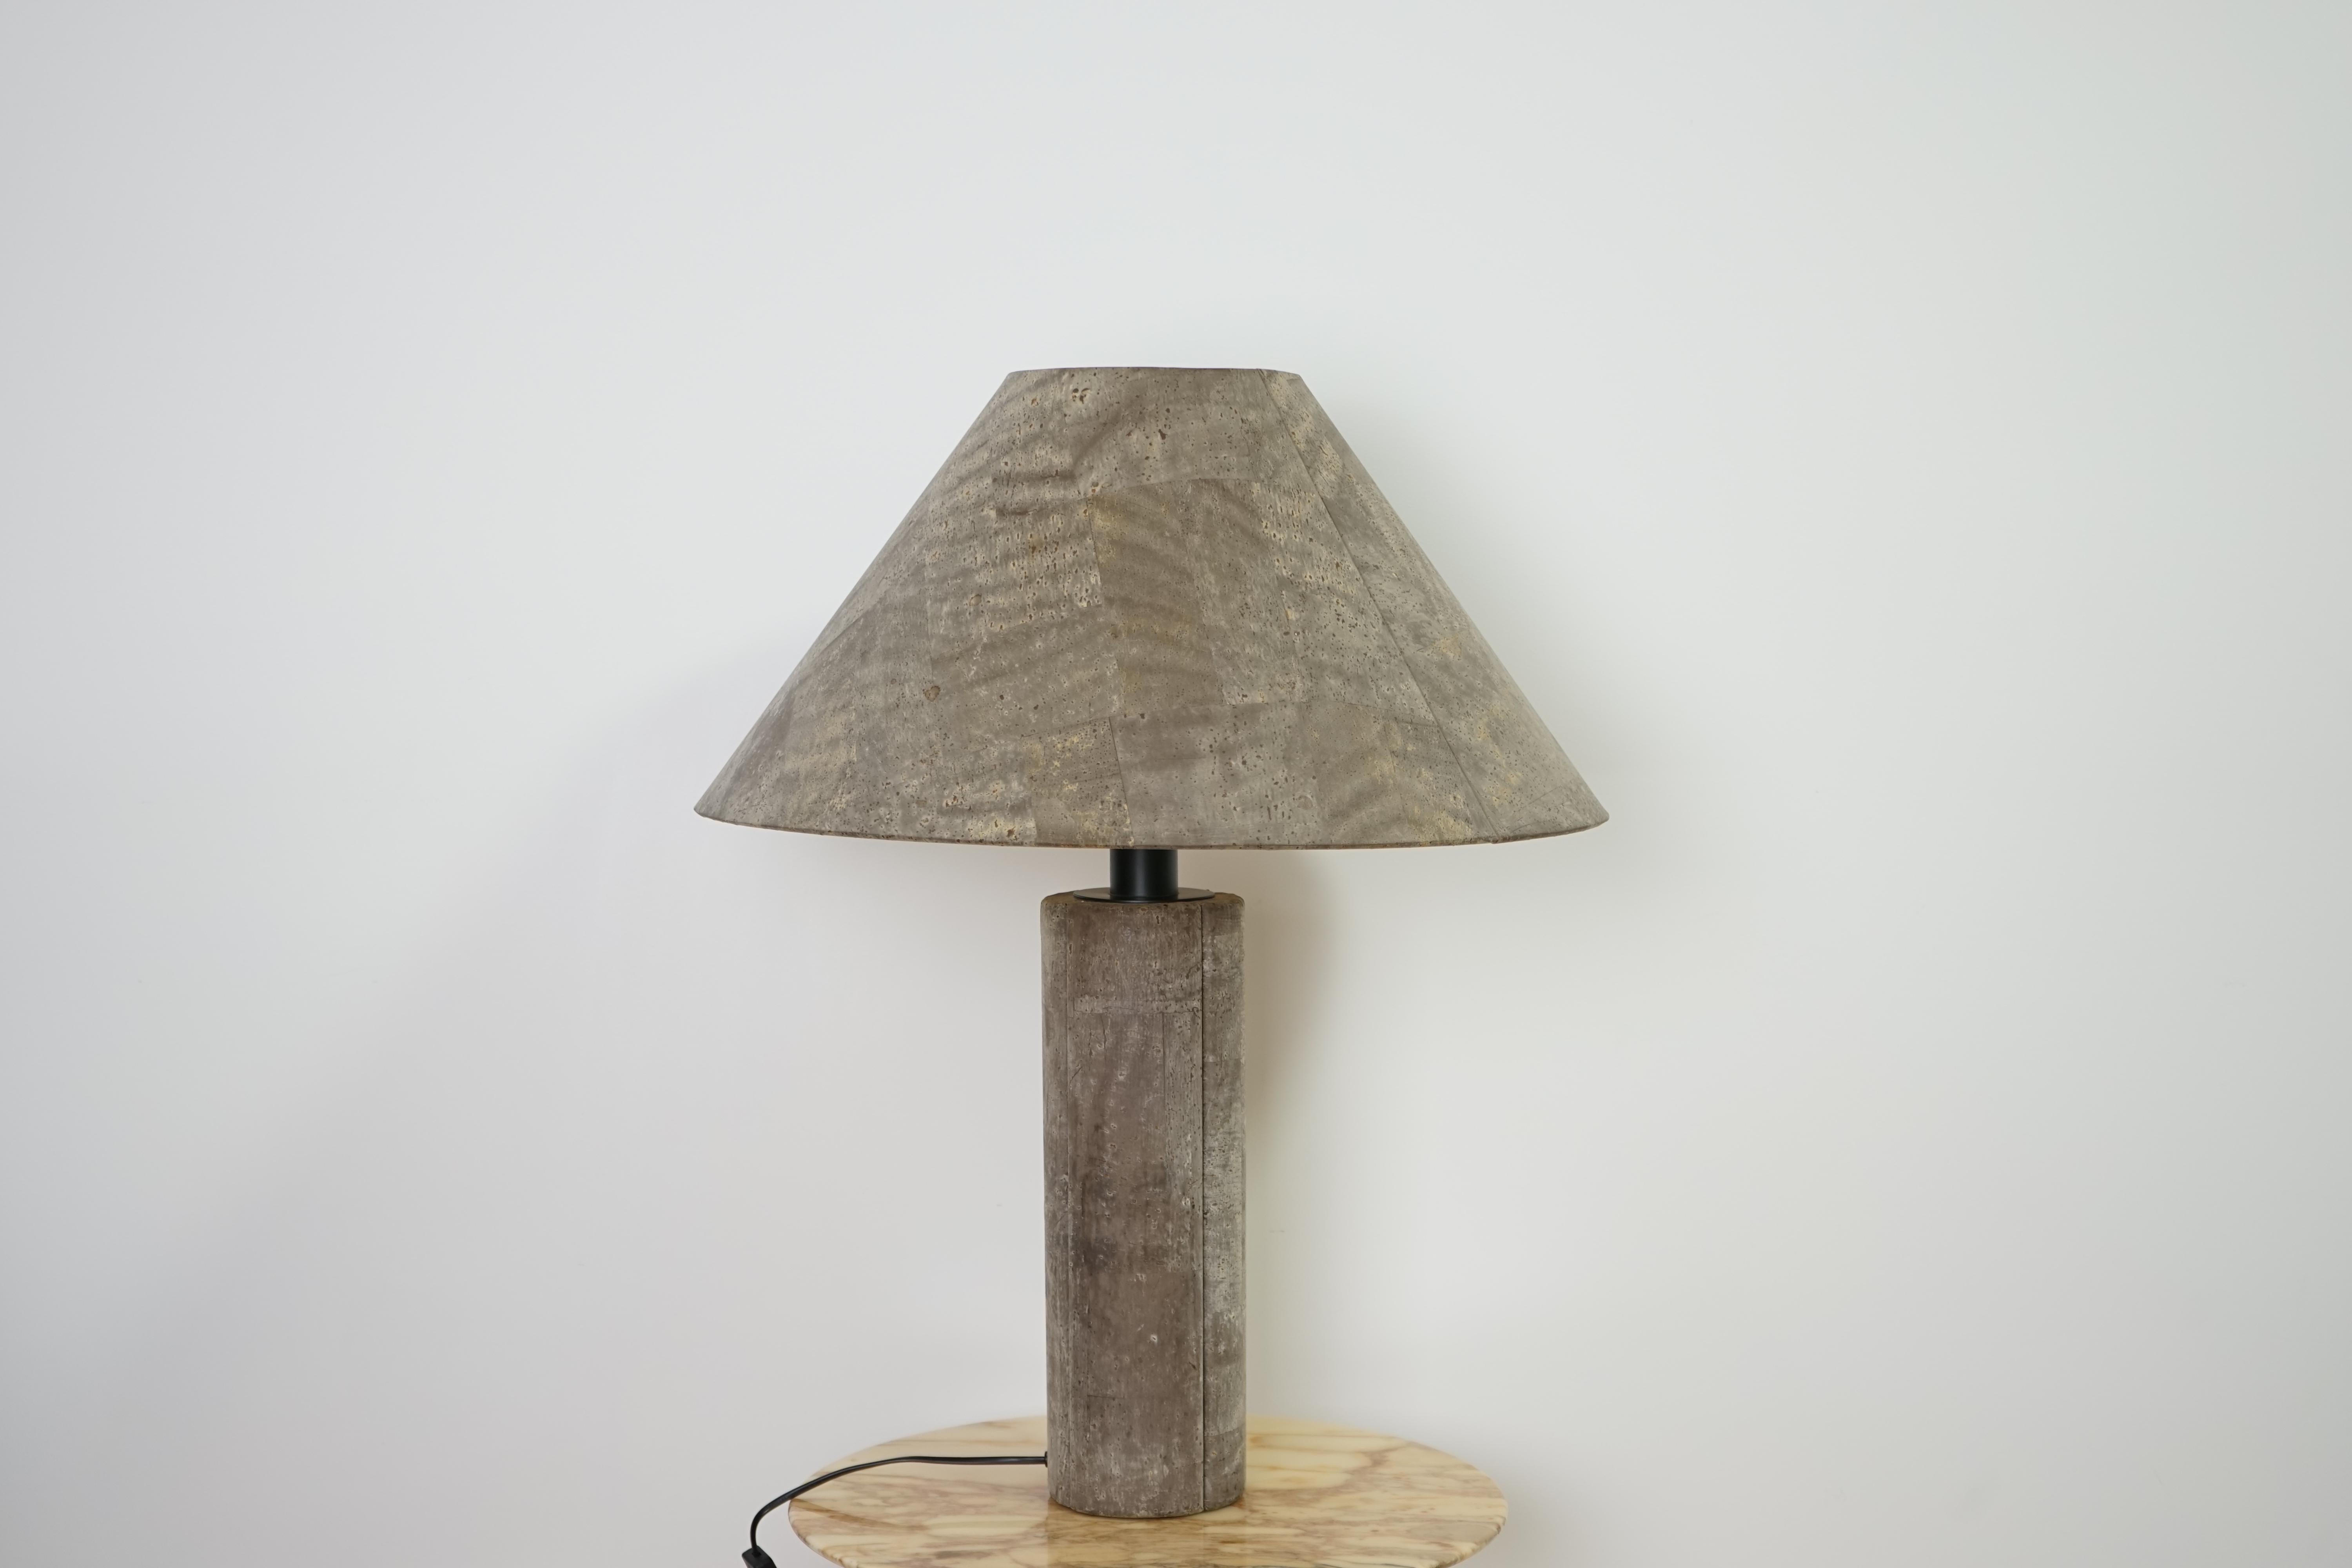 German Large Table Lamp in Cork by Ingo Maurer for Design M, 1970s